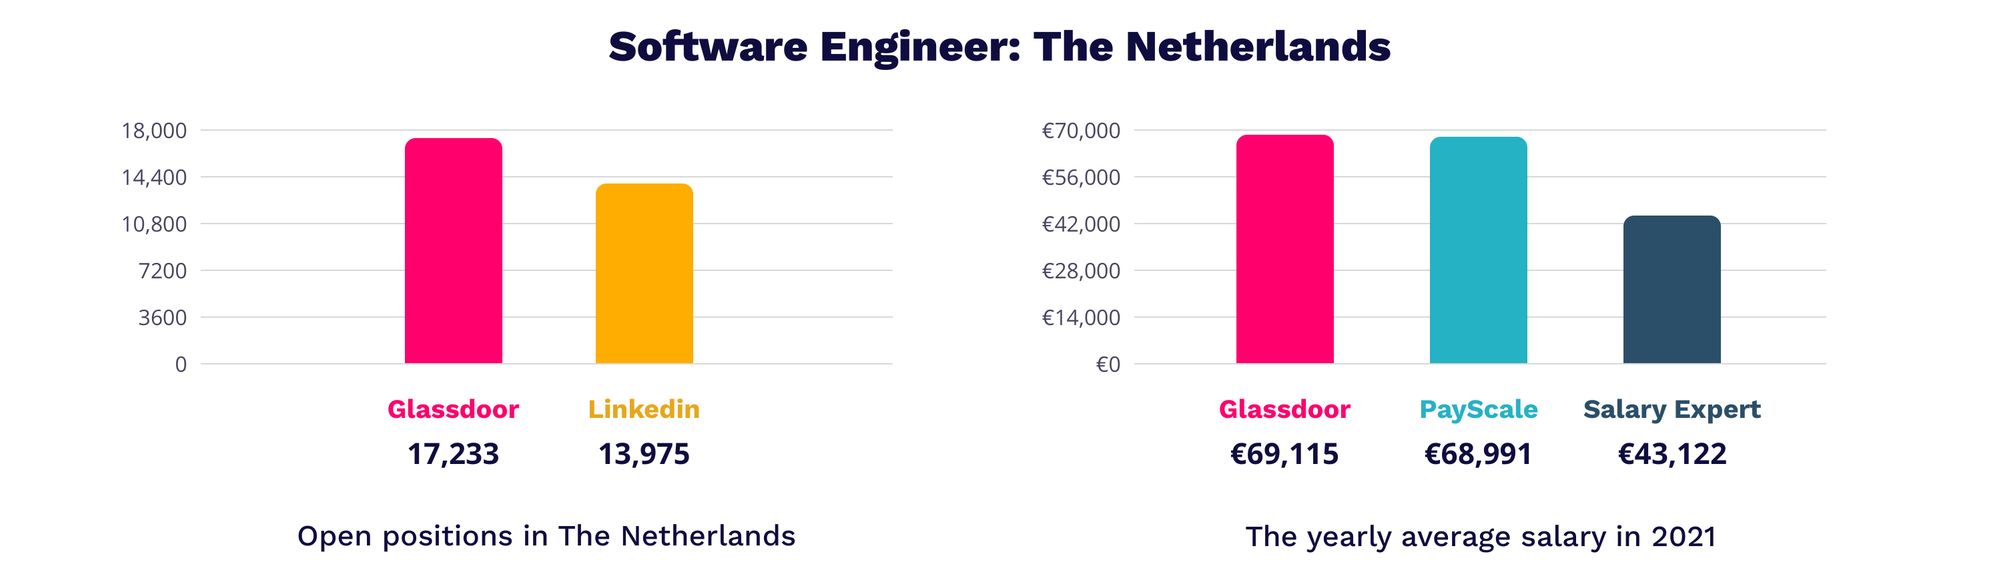 Software Engineers salary - IT Jobs in The Netherlands | MagicHire.co